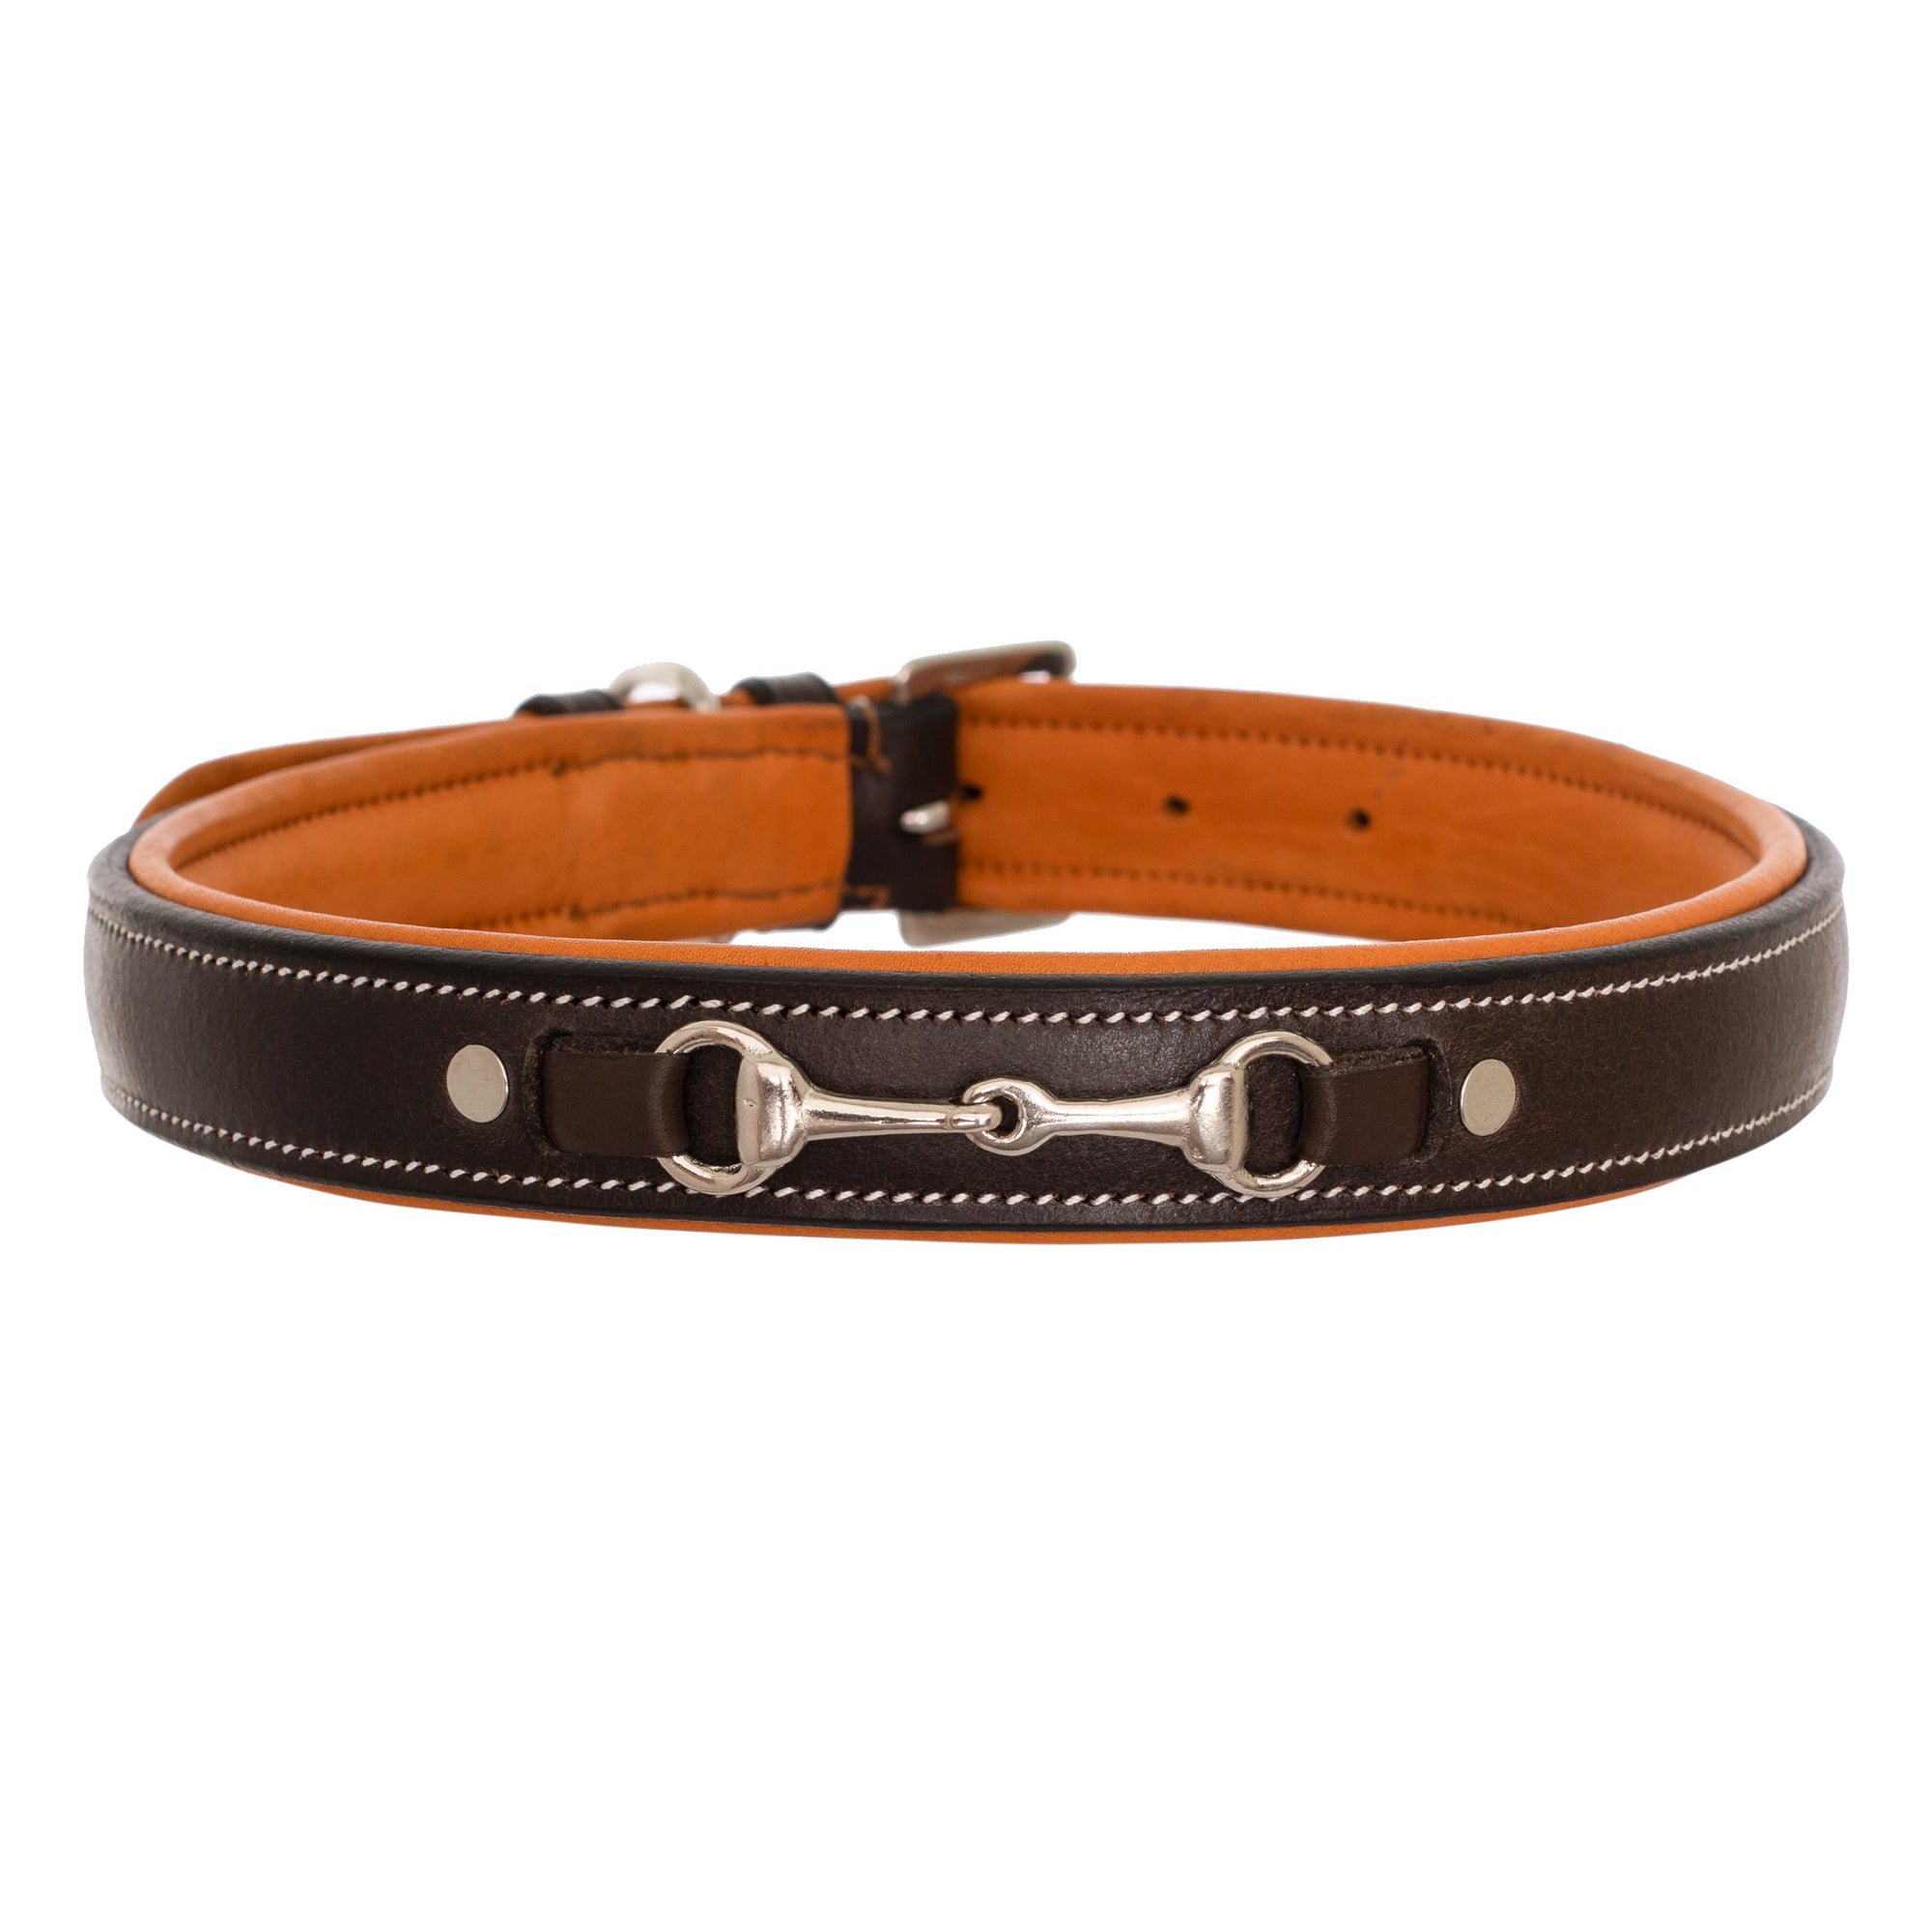 Best Dog Collars and Leashes - Bridles & Reins